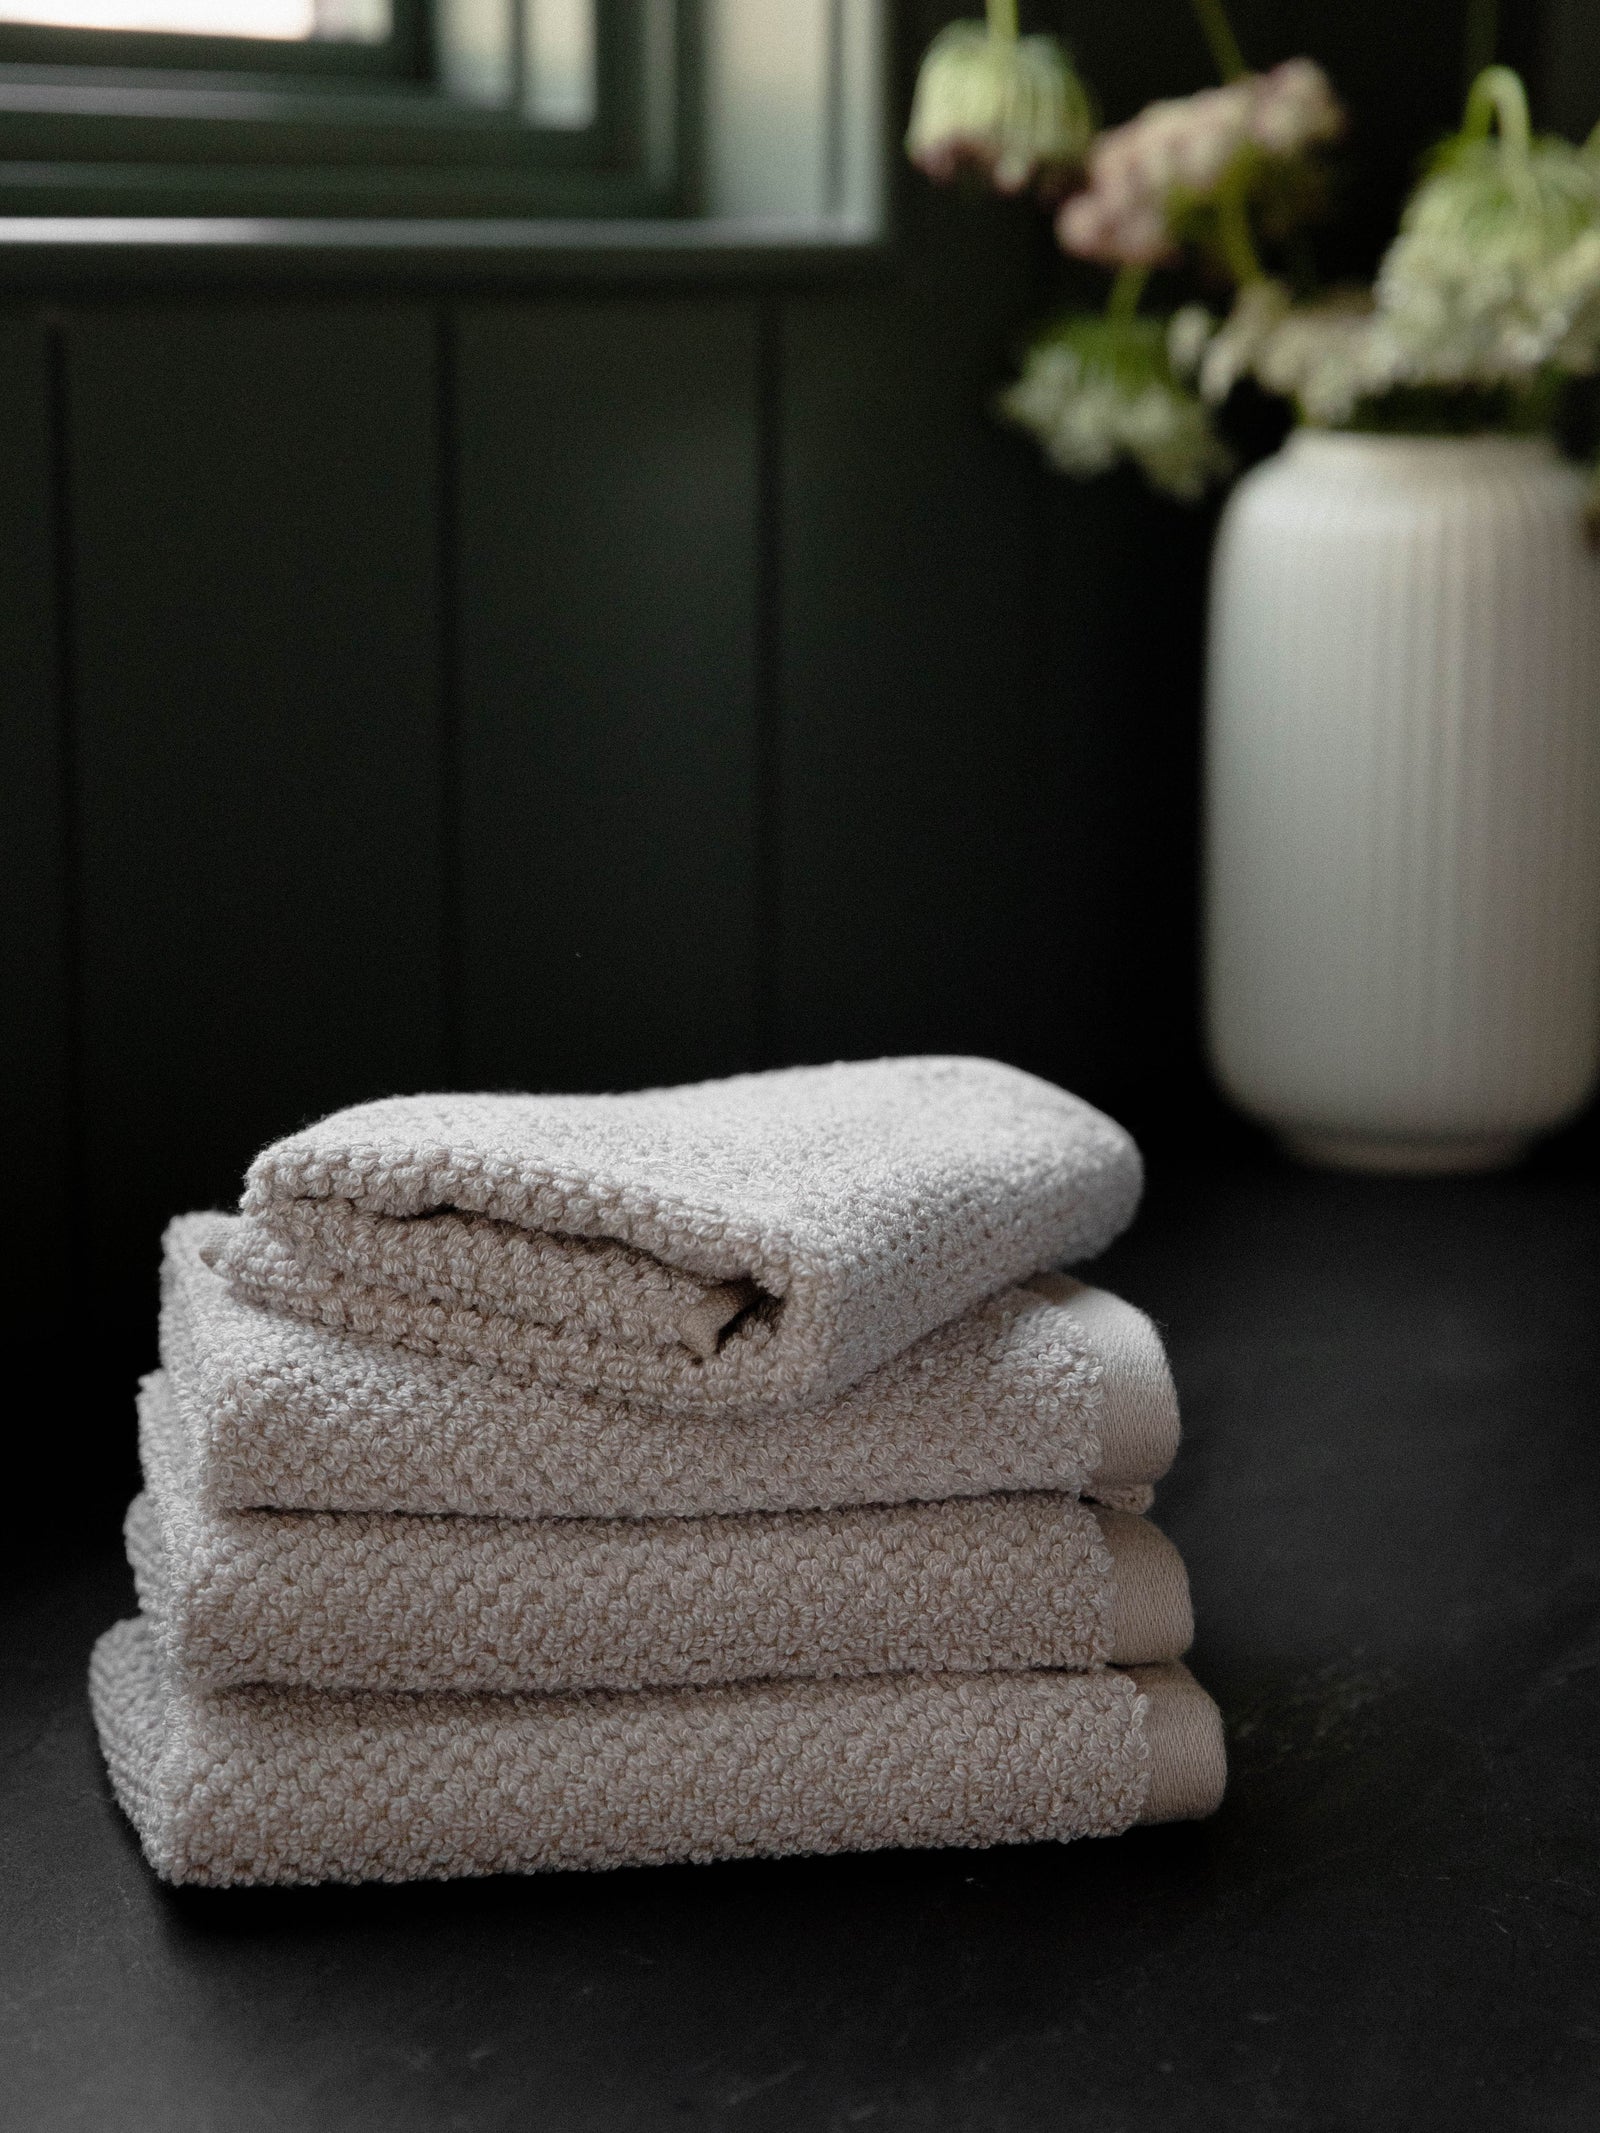 Nantucket Wash Cloths in the color Heathered Sand. Photo of Nantucket Wash Cloths taken with the Wash Cloths resting on a countertop in a bathroom. 